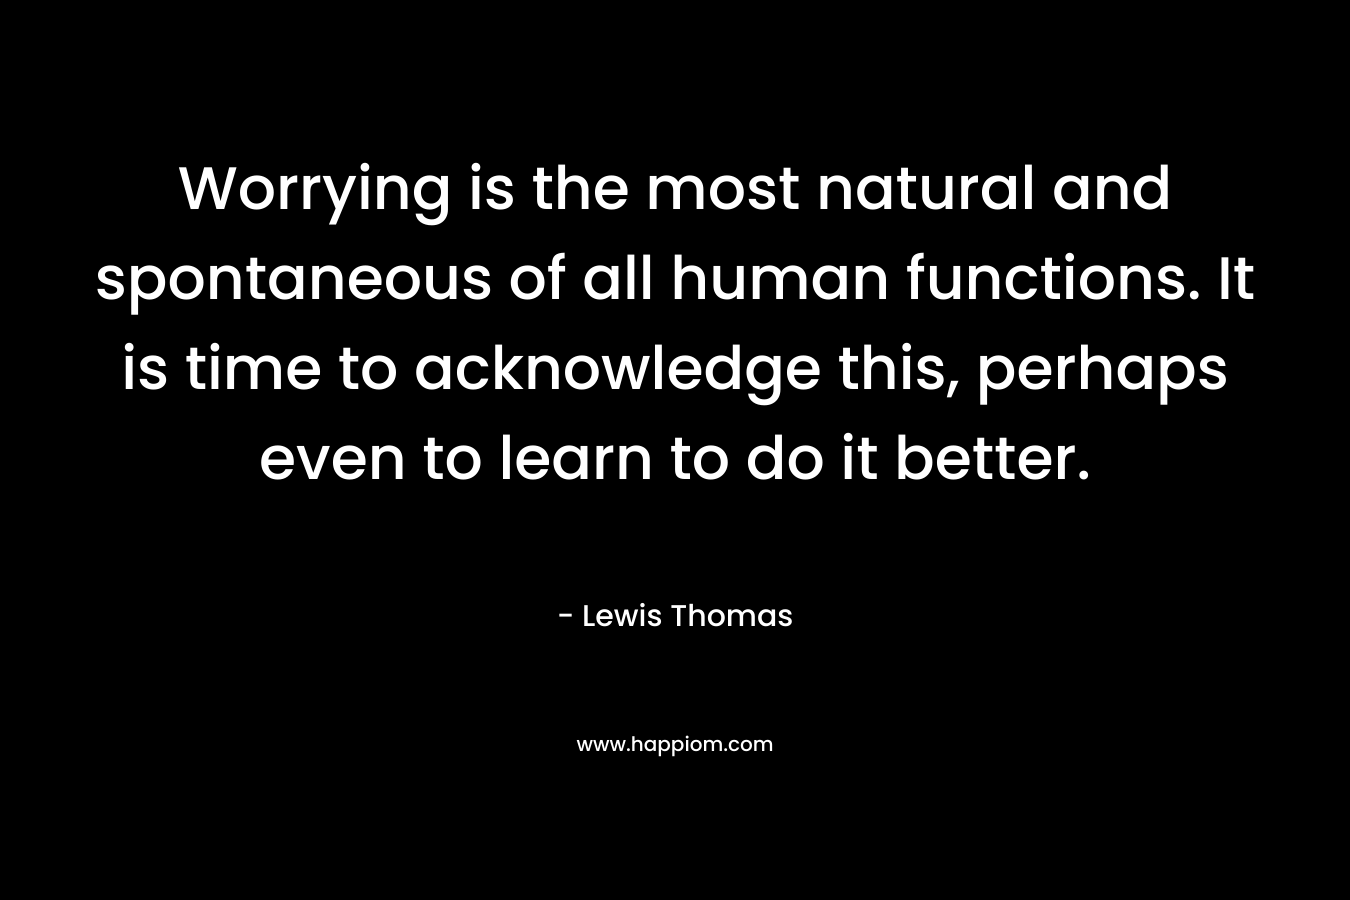 Worrying is the most natural and spontaneous of all human functions. It is time to acknowledge this, perhaps even to learn to do it better.